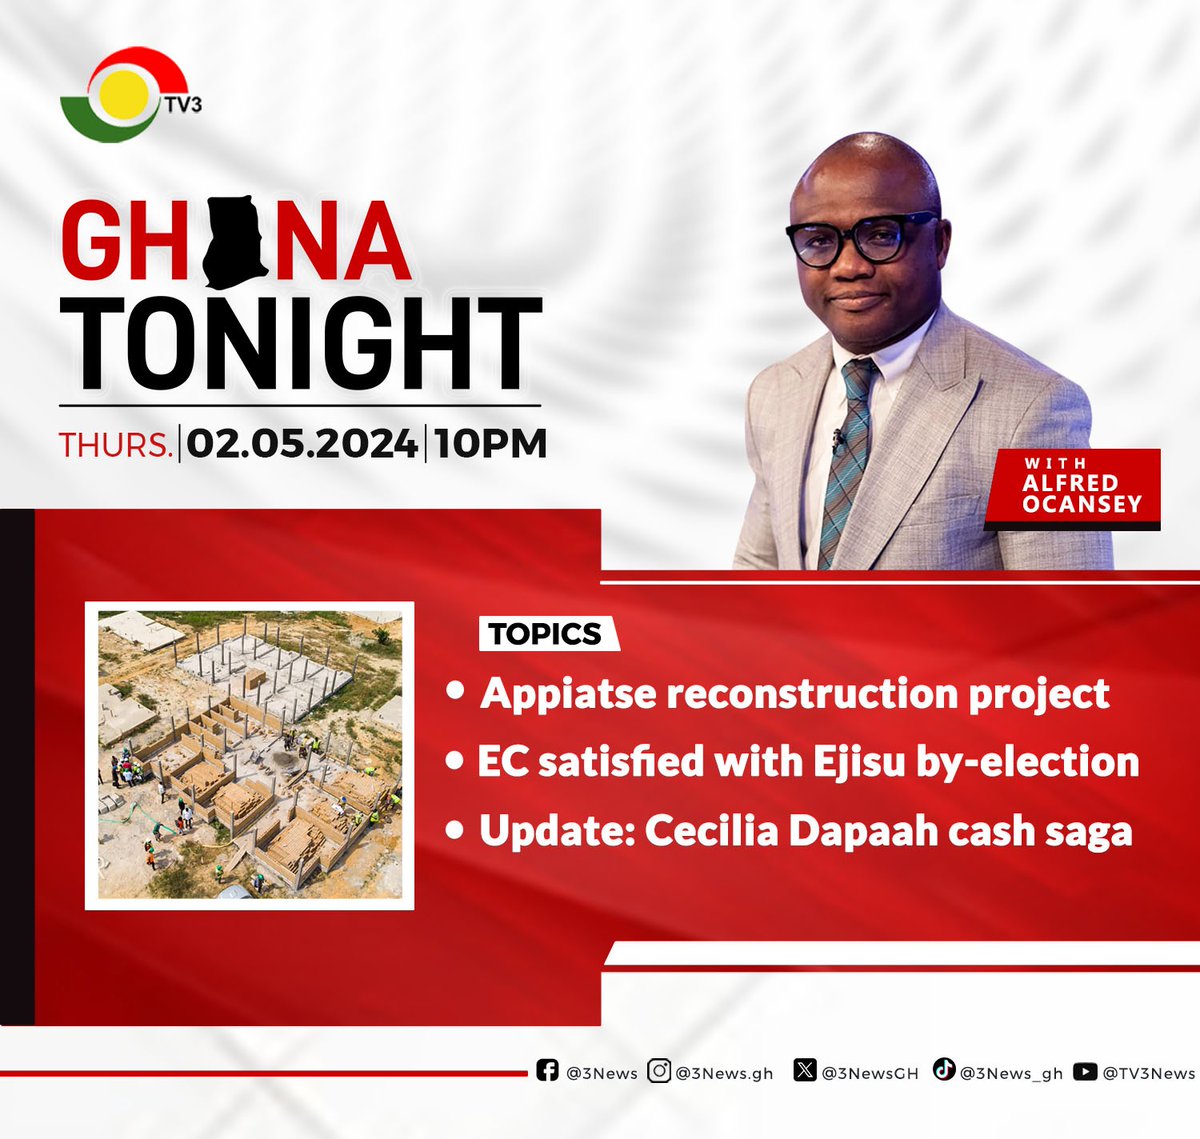 This evening on #GhanaTonight with @alfred_3fm at 10PM

#3NewsGH